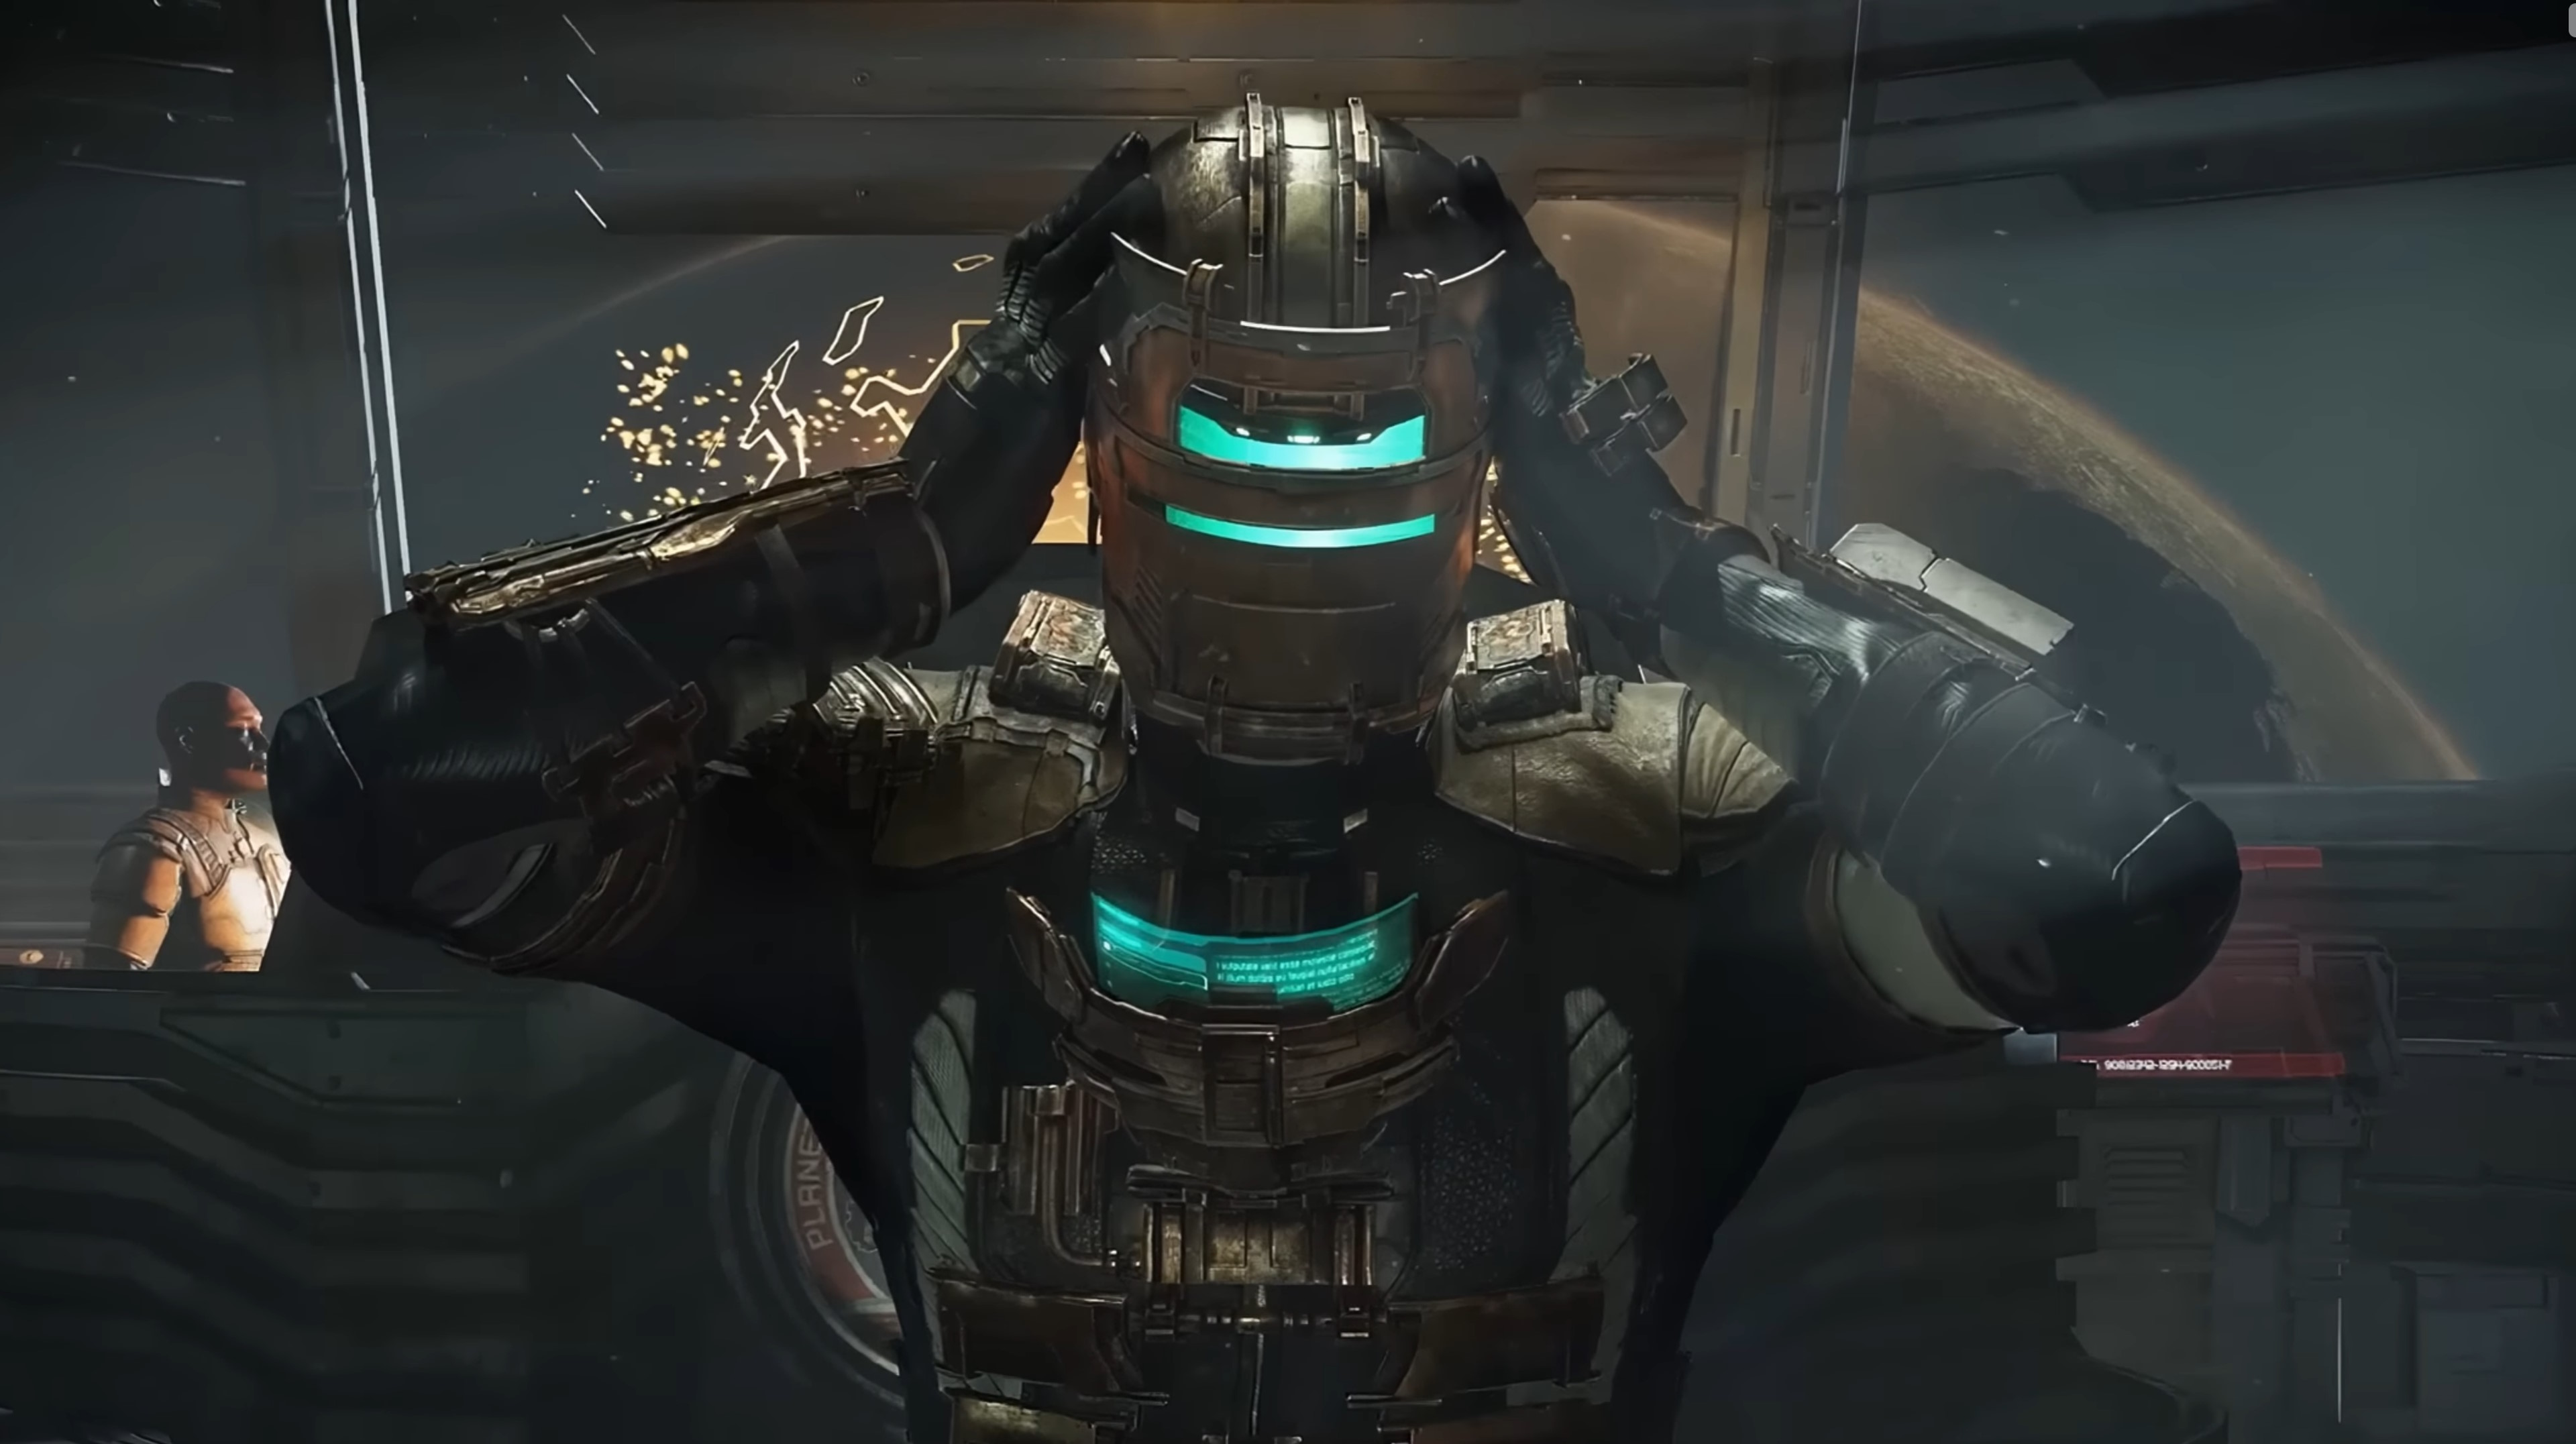  The Dead Space remake will blur out 'disturbing scenes' if you want it to 